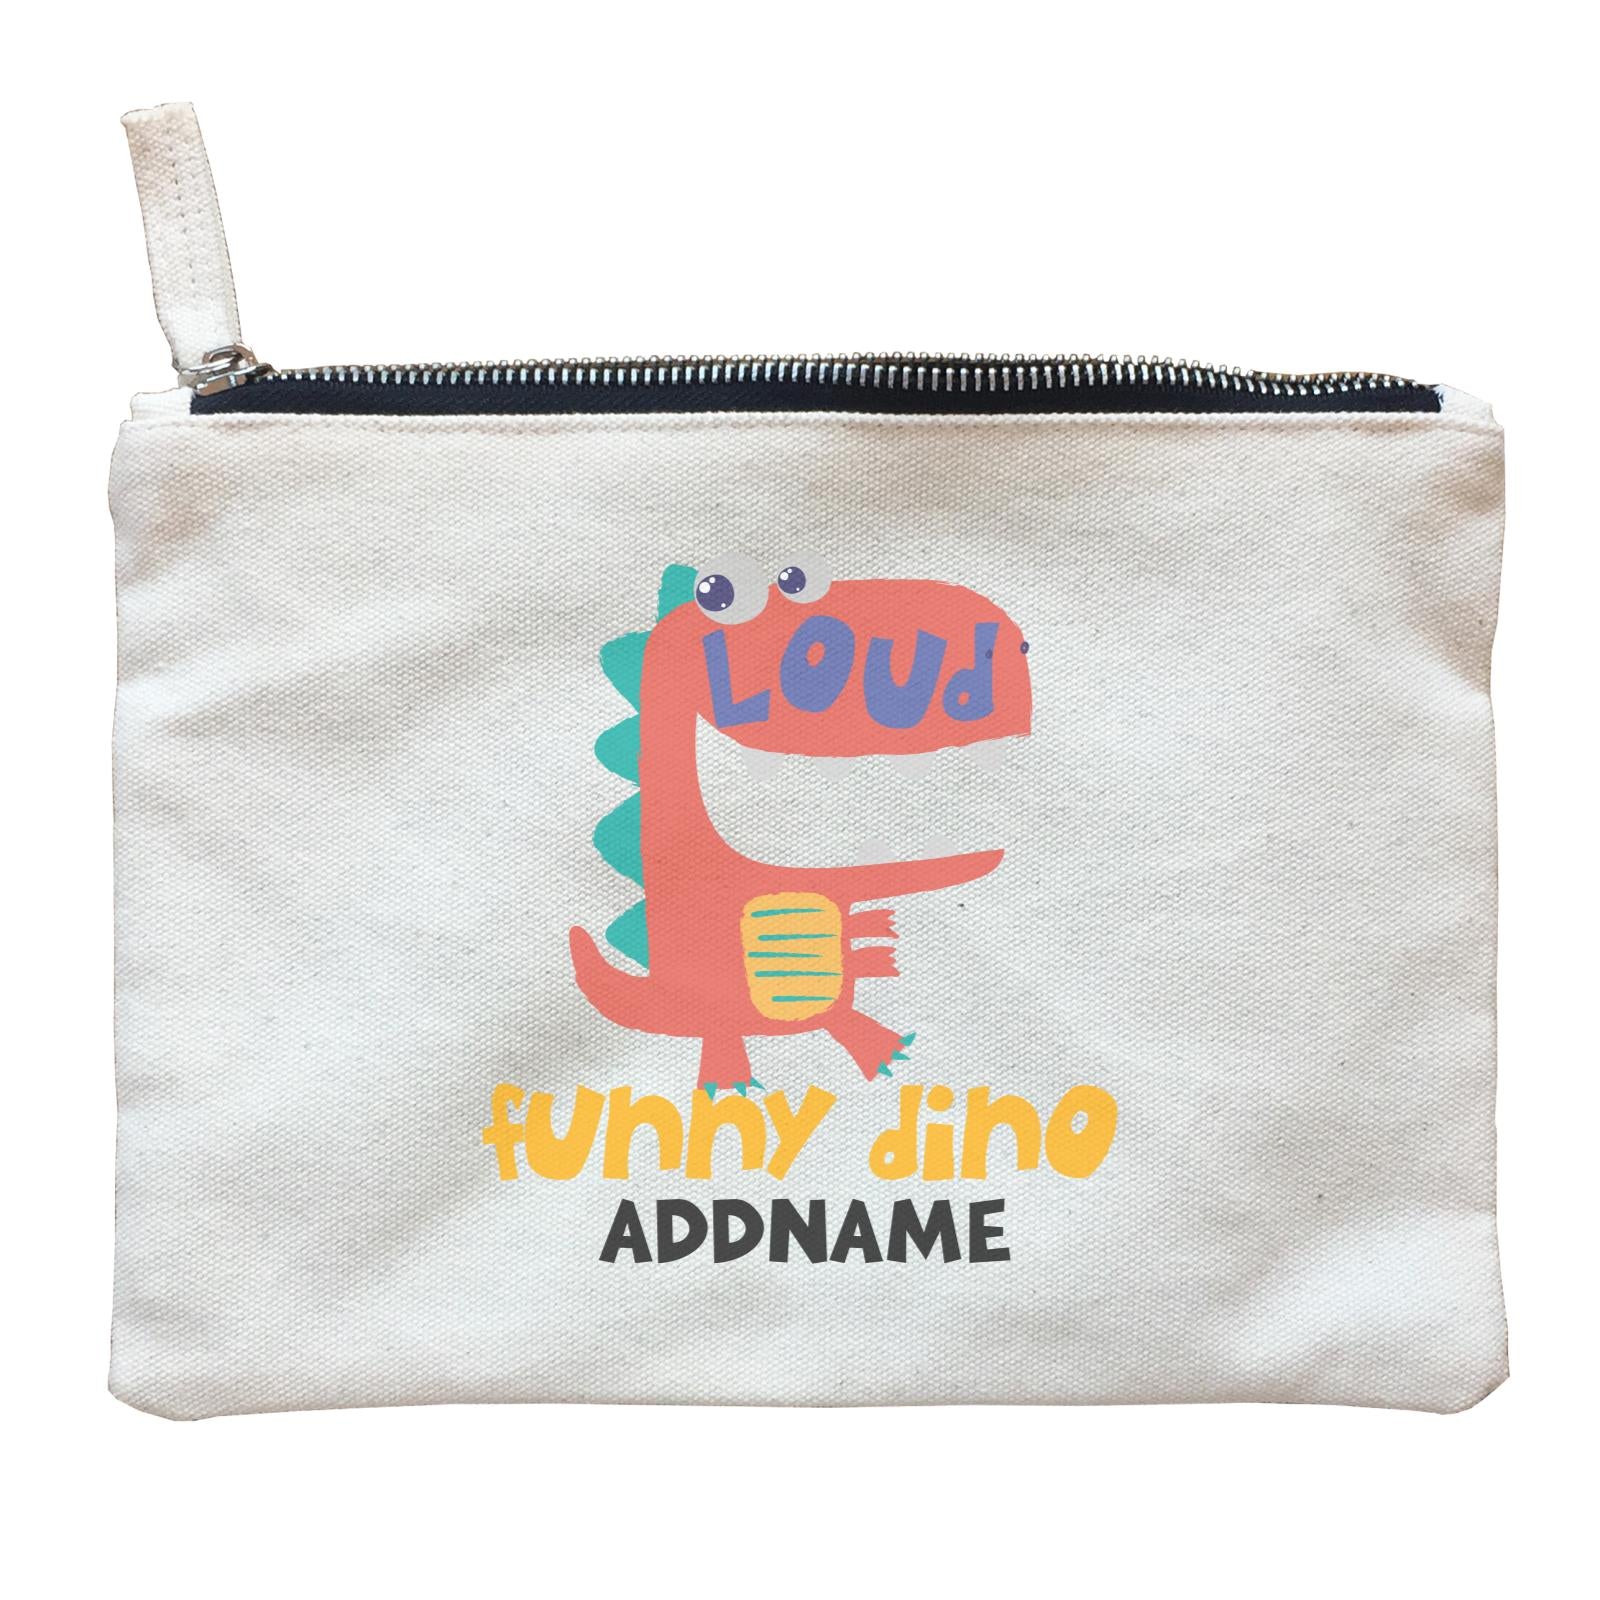 Loud Funny Dino Addname Bag Zipper Pouch